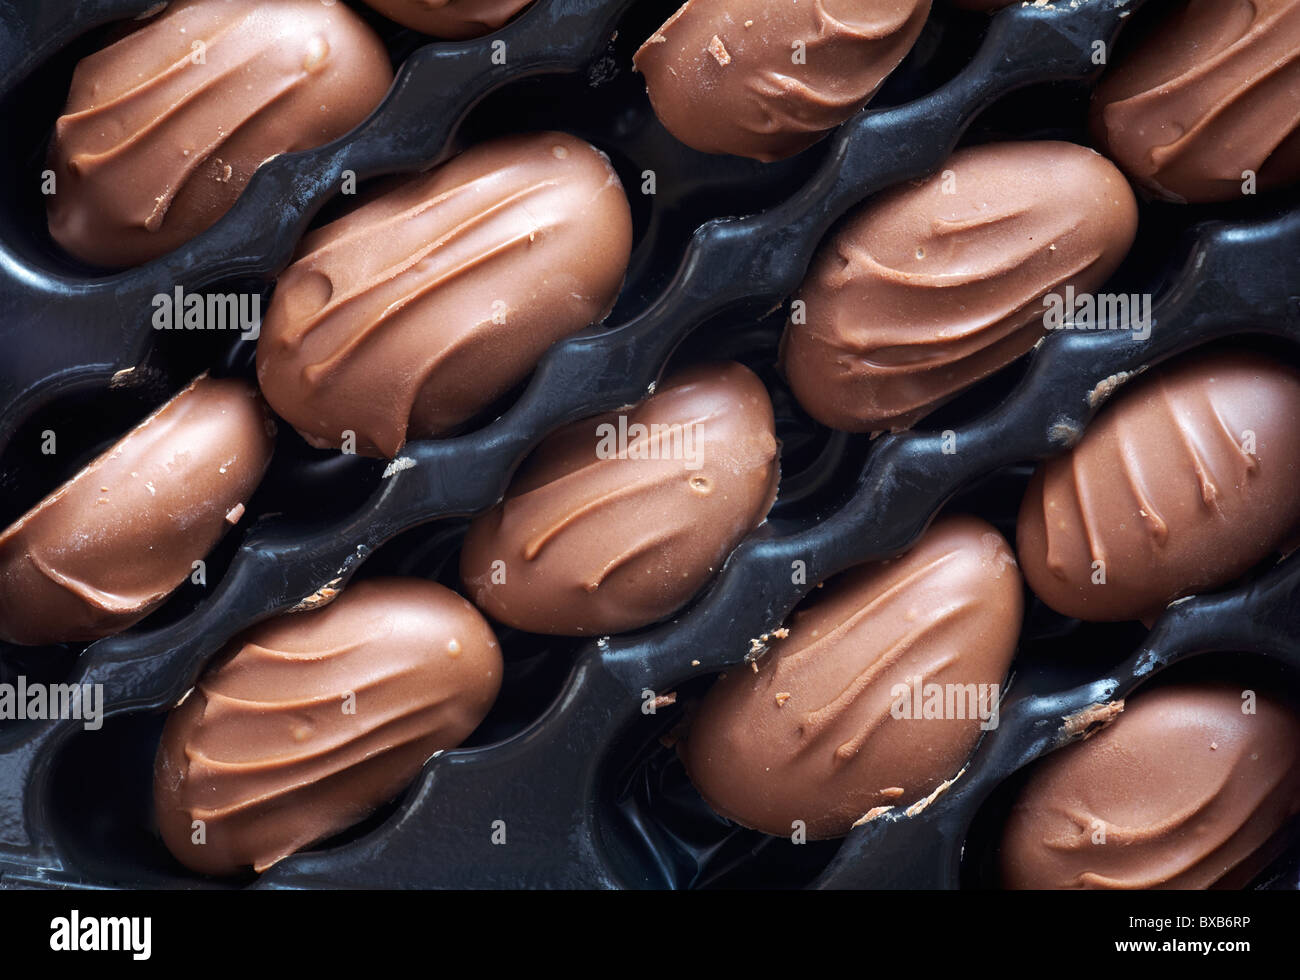 Milk Chocolate covered brazil nuts Stock Photo